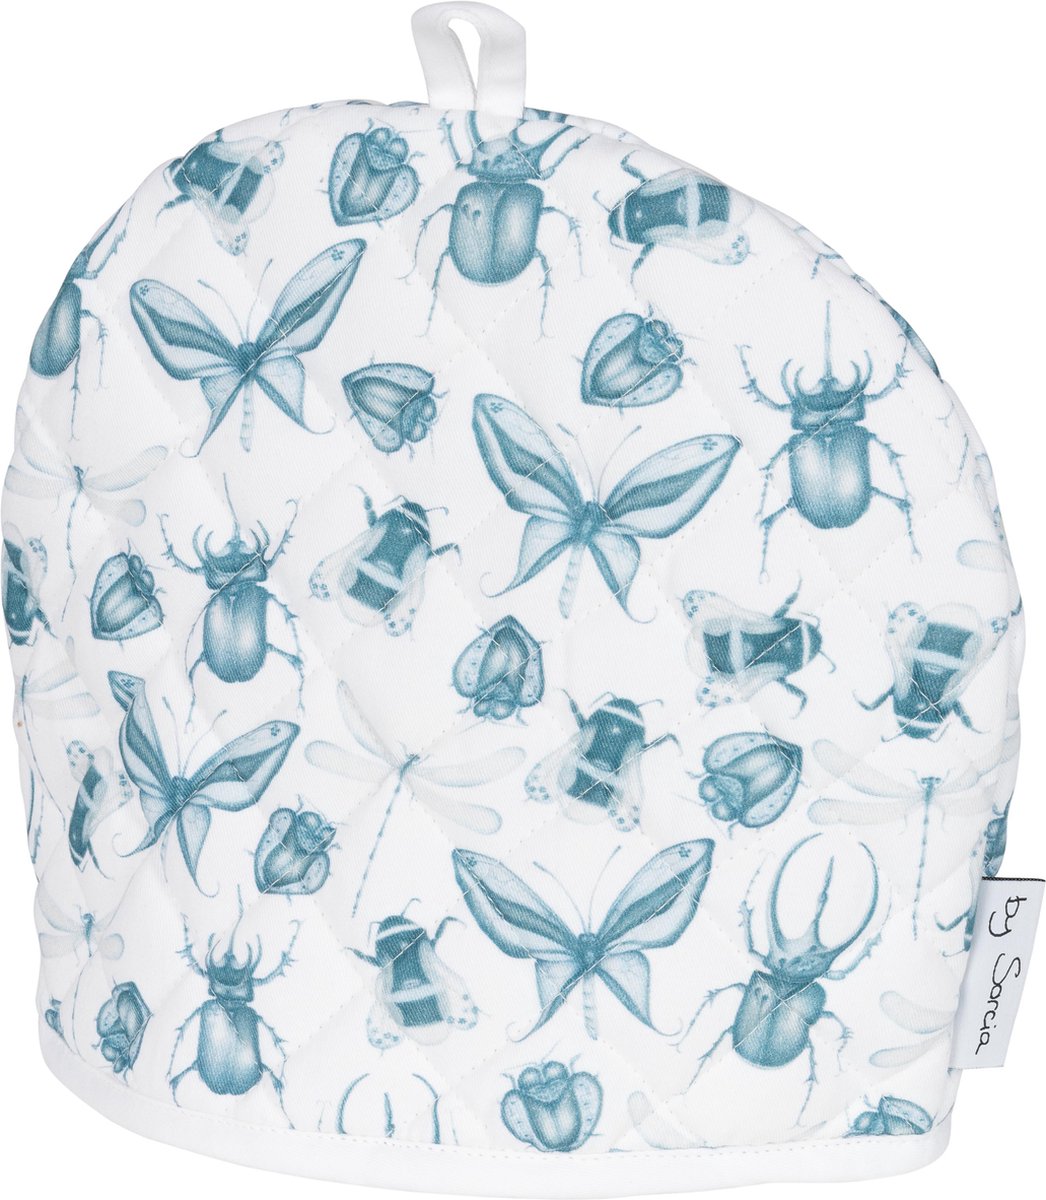 by Sorcia - theemuts Delft Blue Insects - 30x25cm - katoen - designed in Holland - by Sorcia